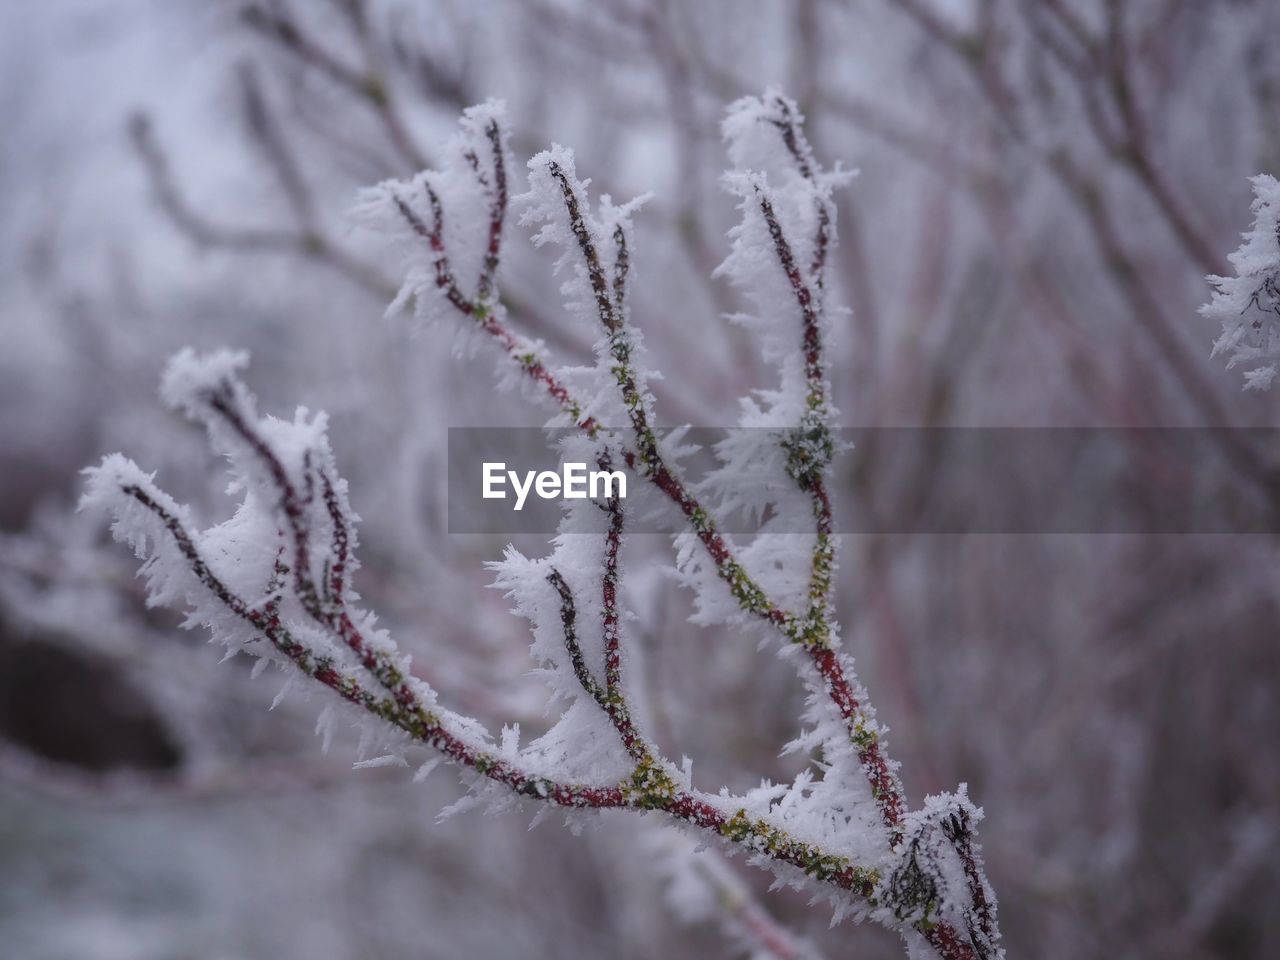 frost, winter, plant, freezing, cold temperature, snow, tree, nature, branch, beauty in nature, frozen, no people, close-up, ice, flower, twig, leaf, environment, growth, coniferous tree, tranquility, outdoors, pinaceae, focus on foreground, land, plant stem, forest, day, macro photography, selective focus, pine tree, white, freshness